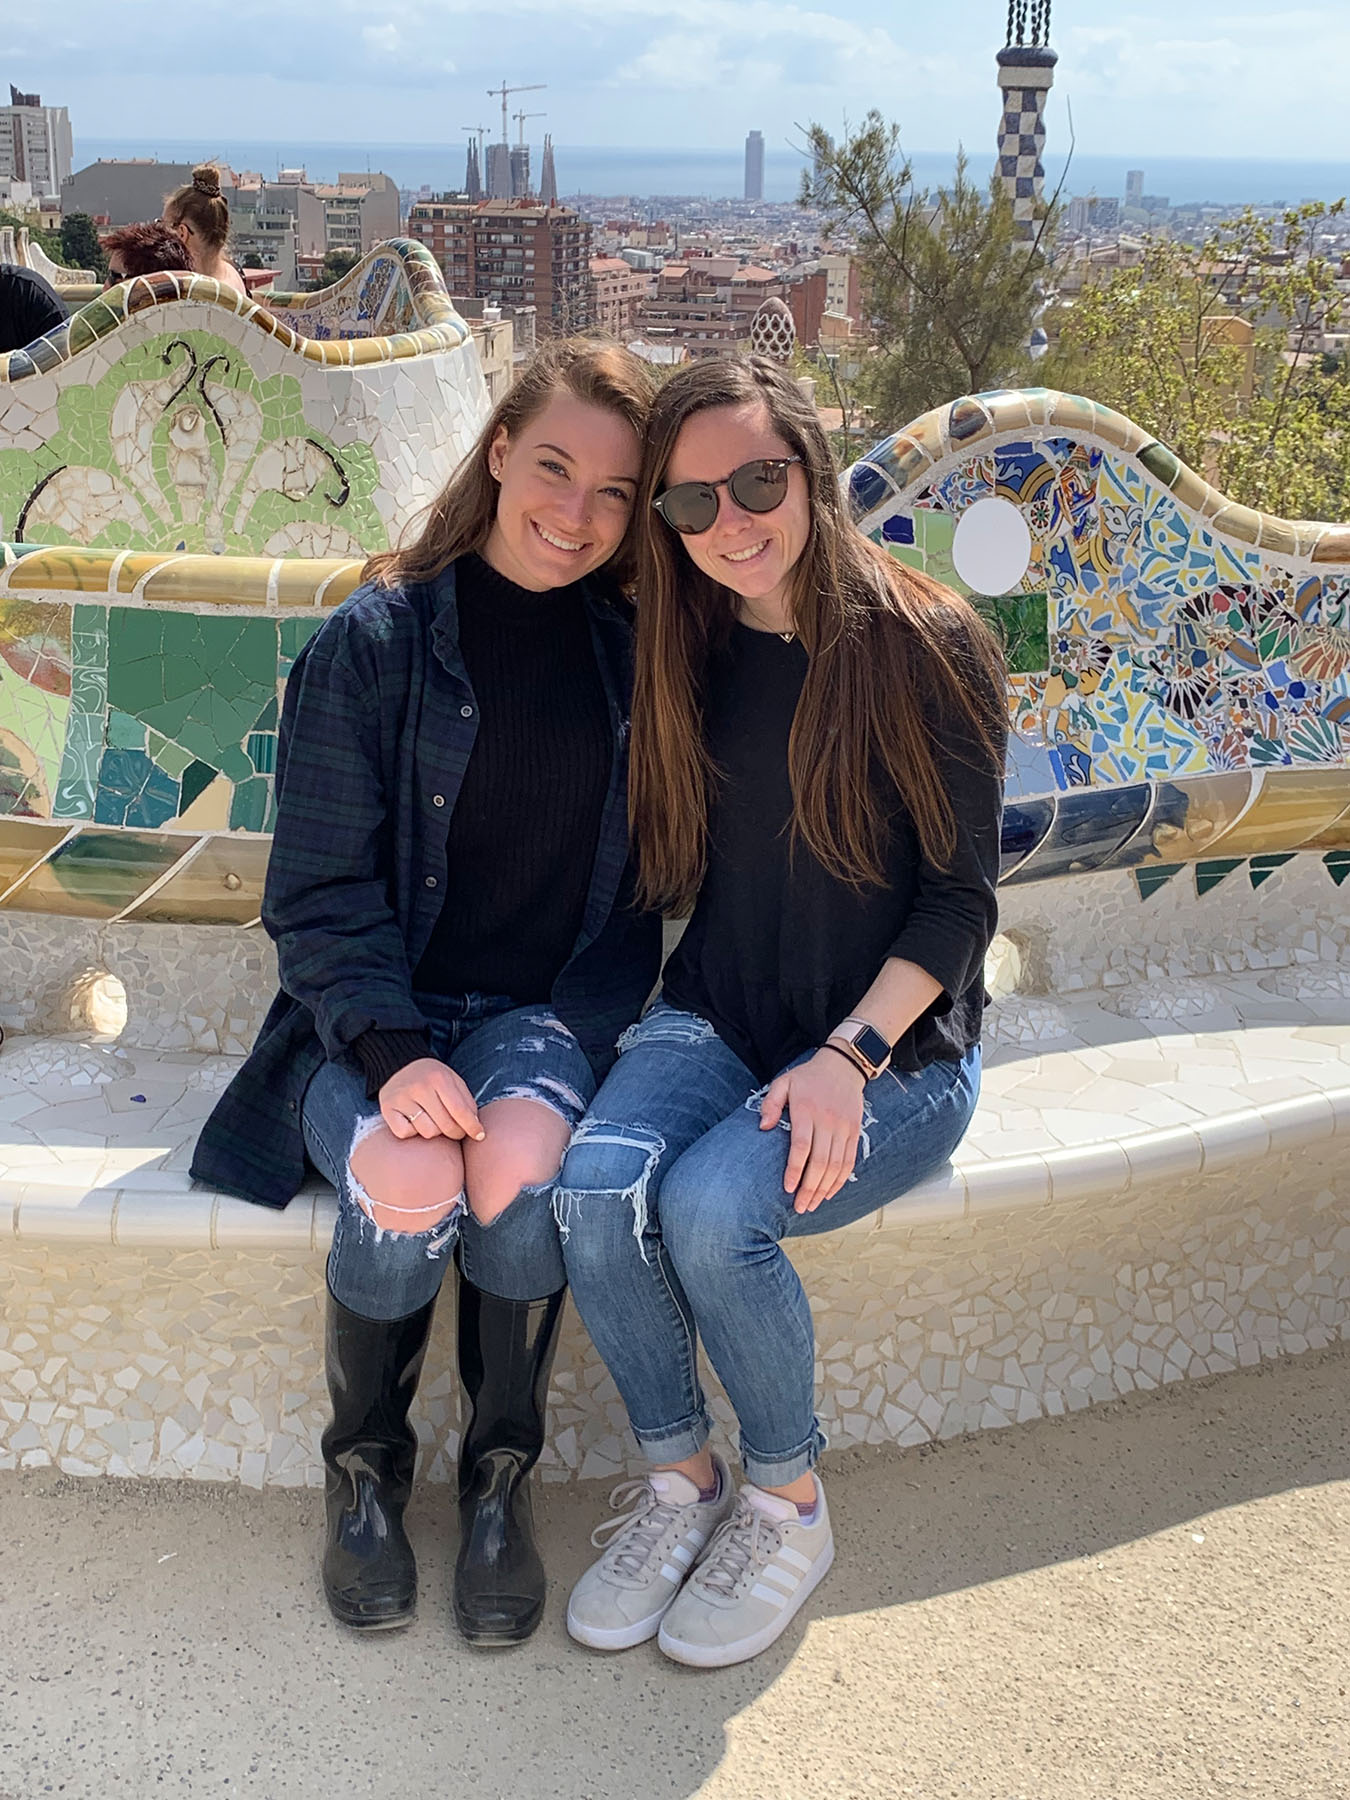 Two creative arts students studying abroad in Barcelona